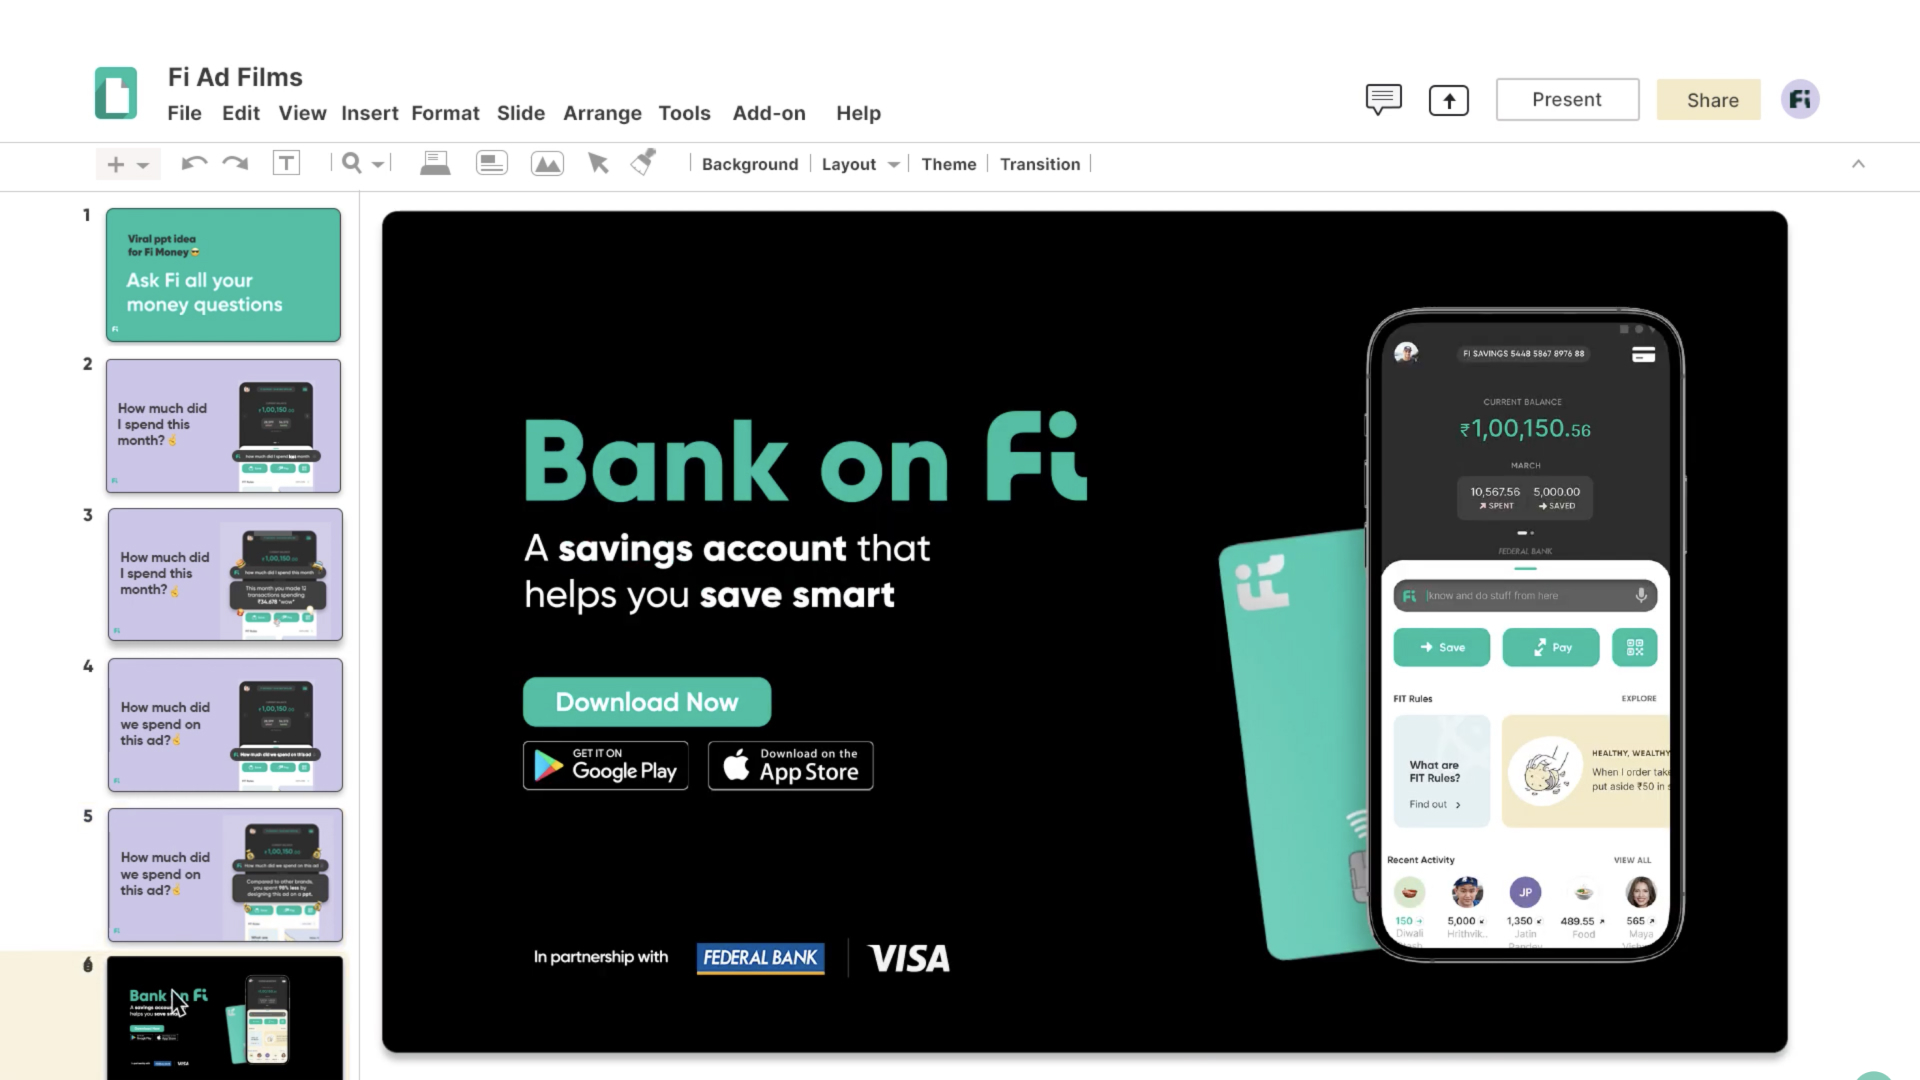 Neo bank Fi- ppt campaign